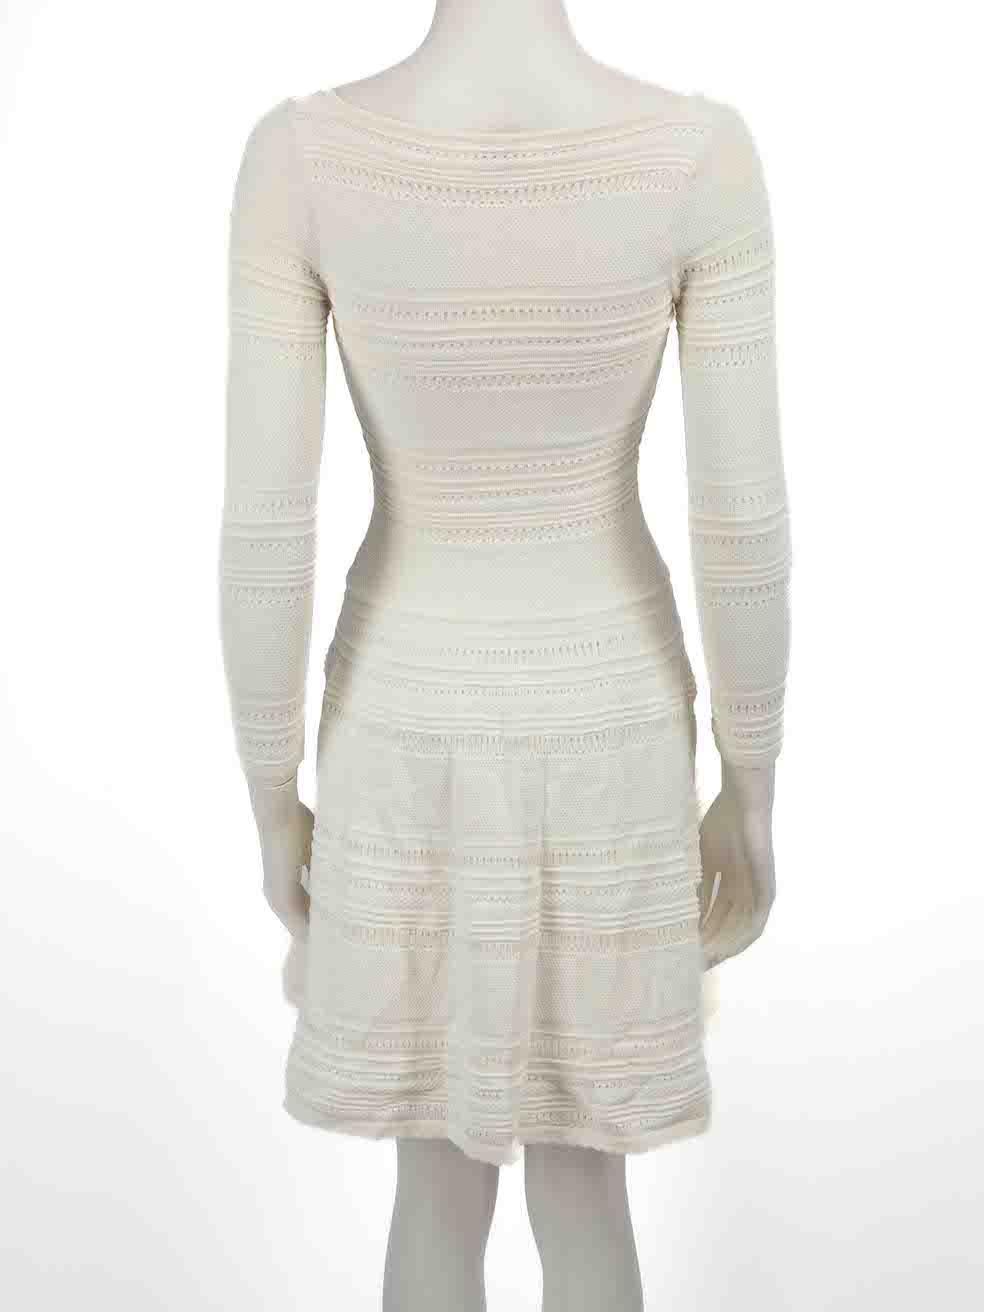 Ronny Kobo White Round-Neck Knitted Dress Size XS In Good Condition For Sale In London, GB